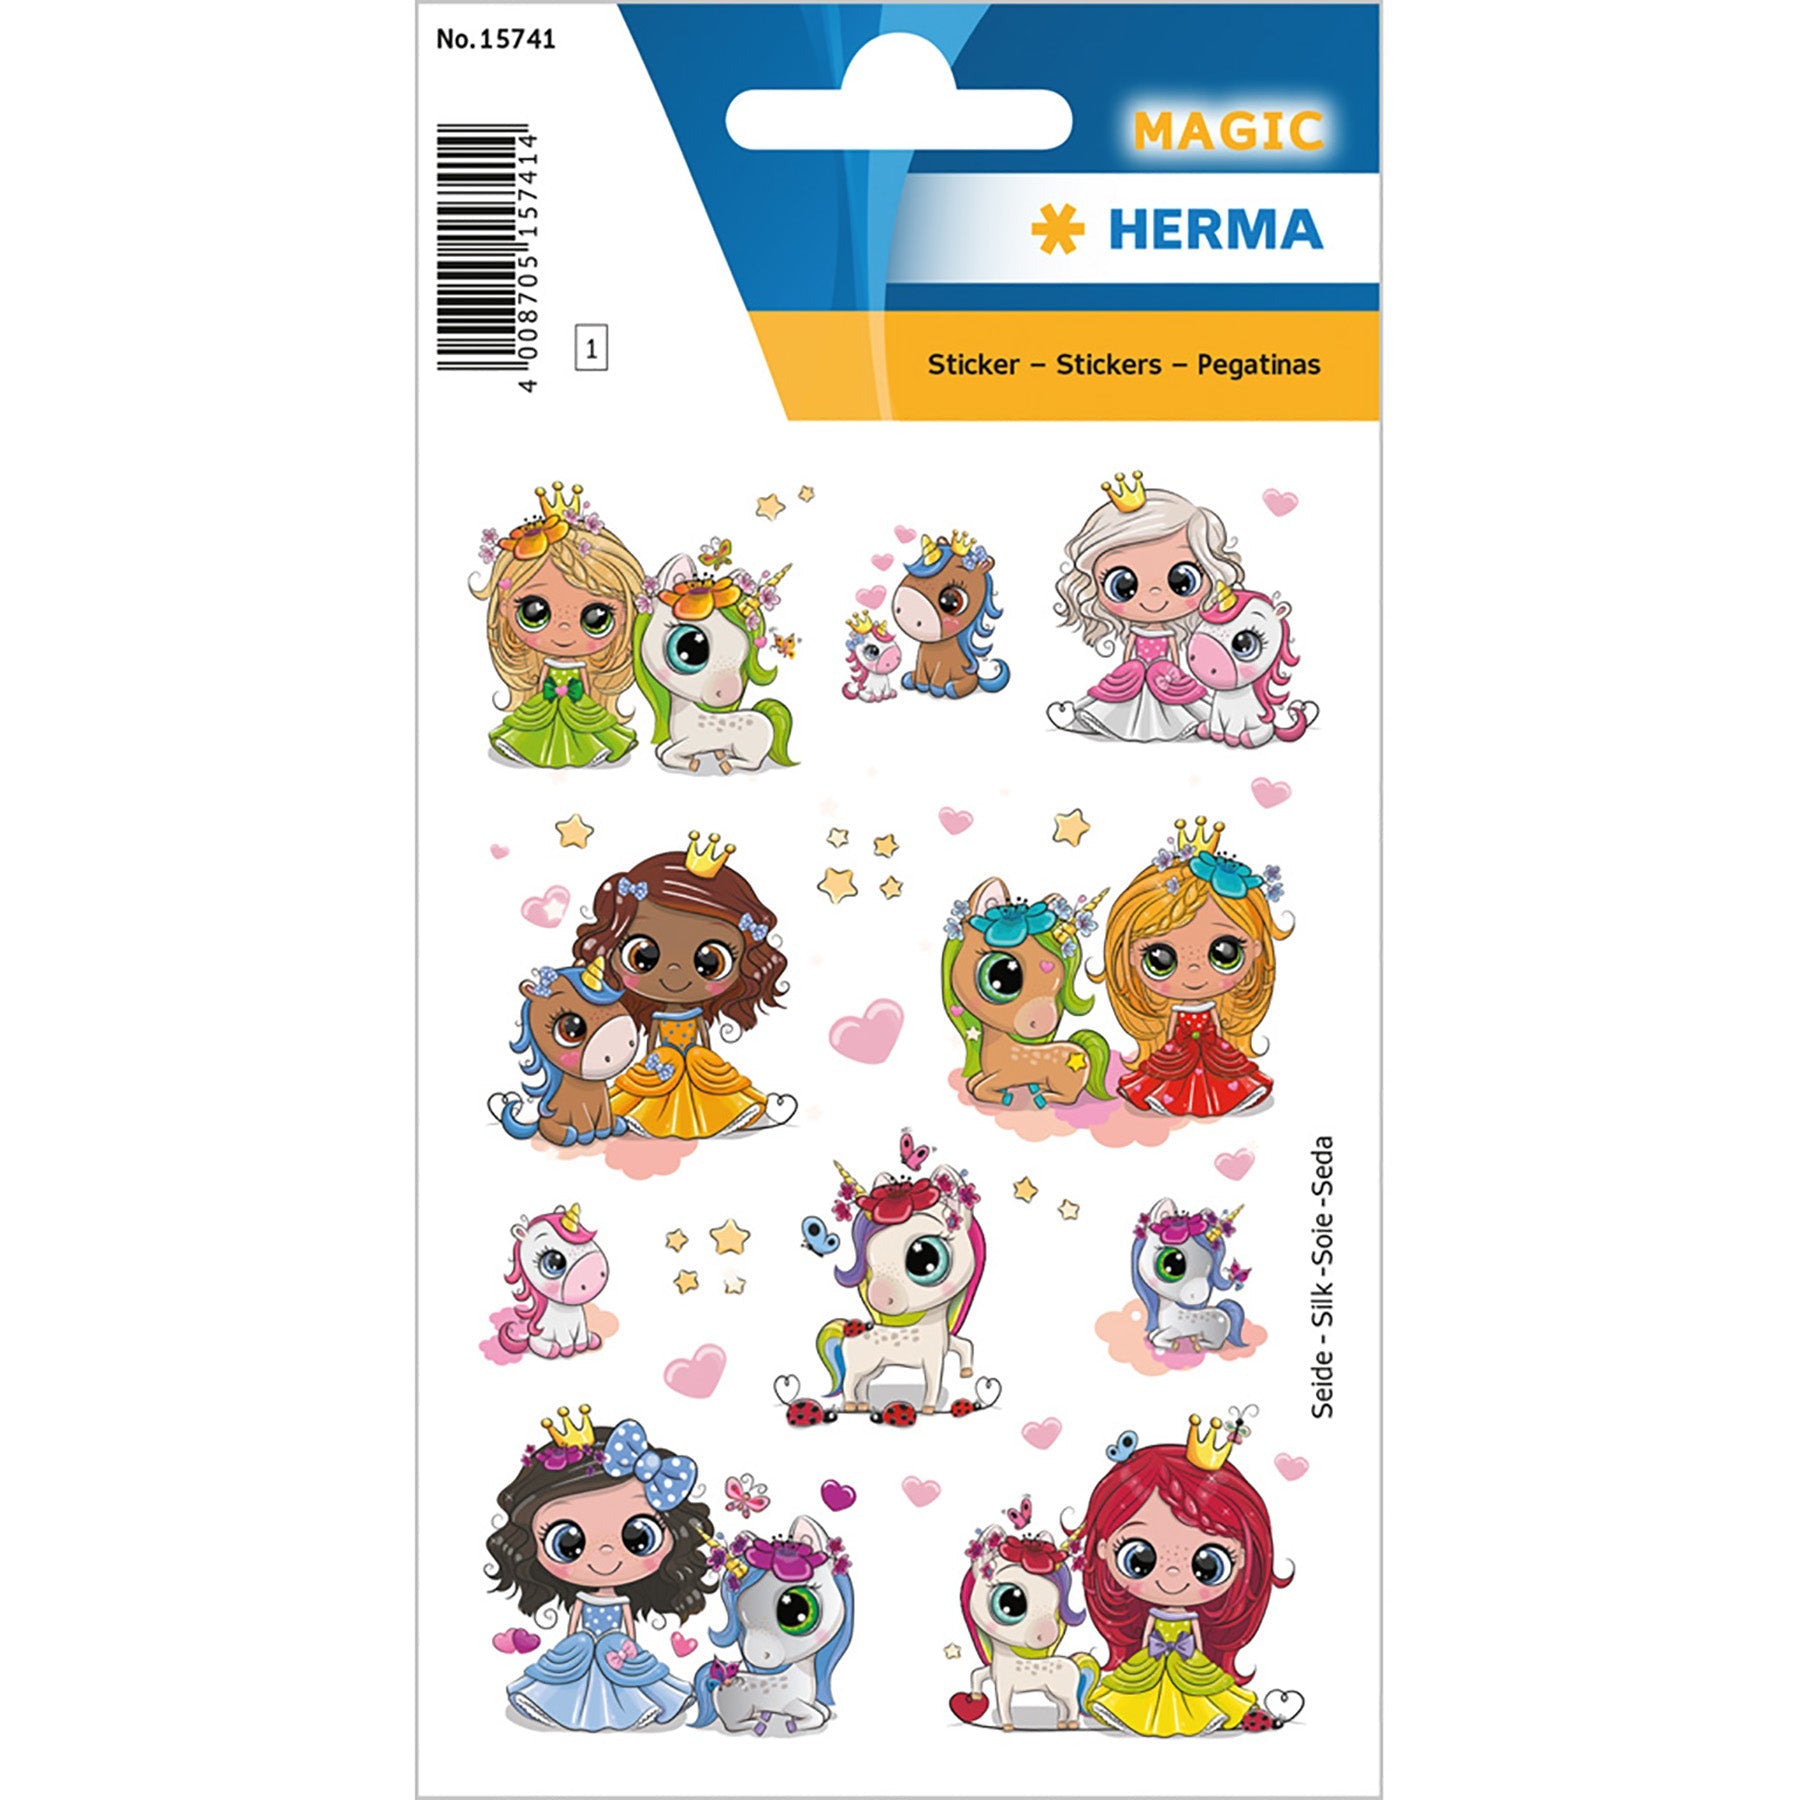 Herma Magic Stickers Sweeties and Friends Silk 4.75x3.1in Sheet